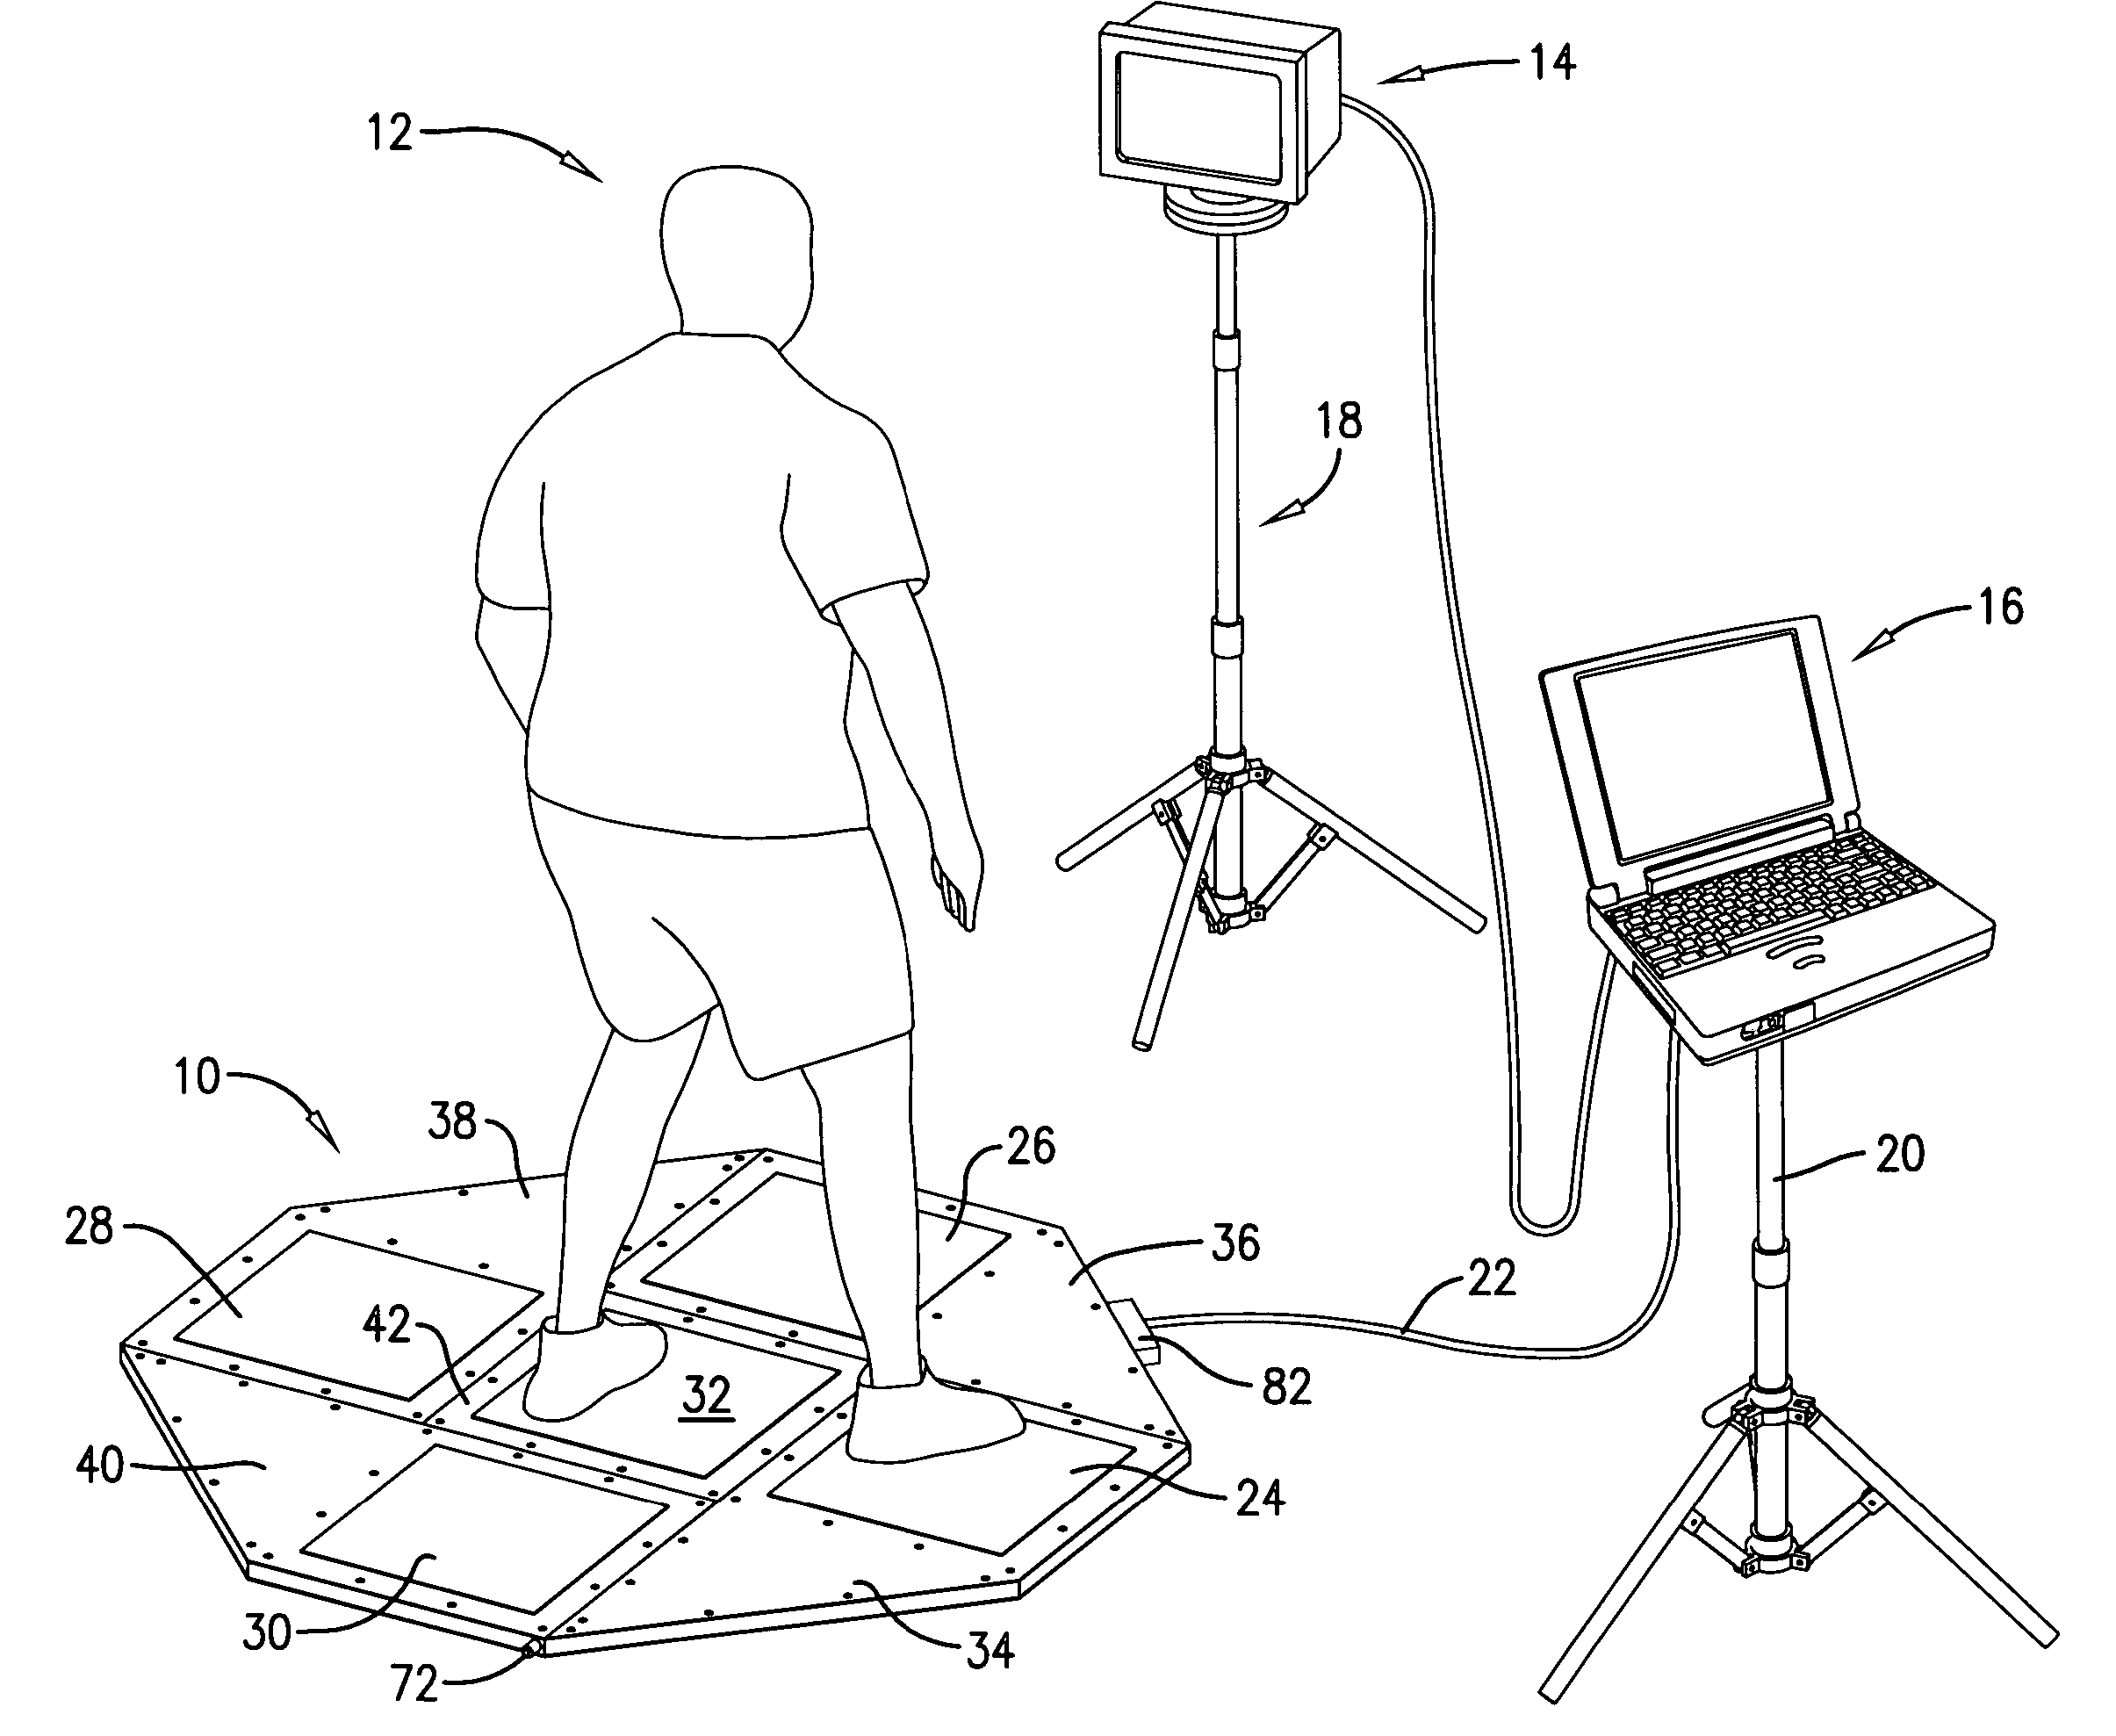 Method and apparatus for oculomotor performance testing